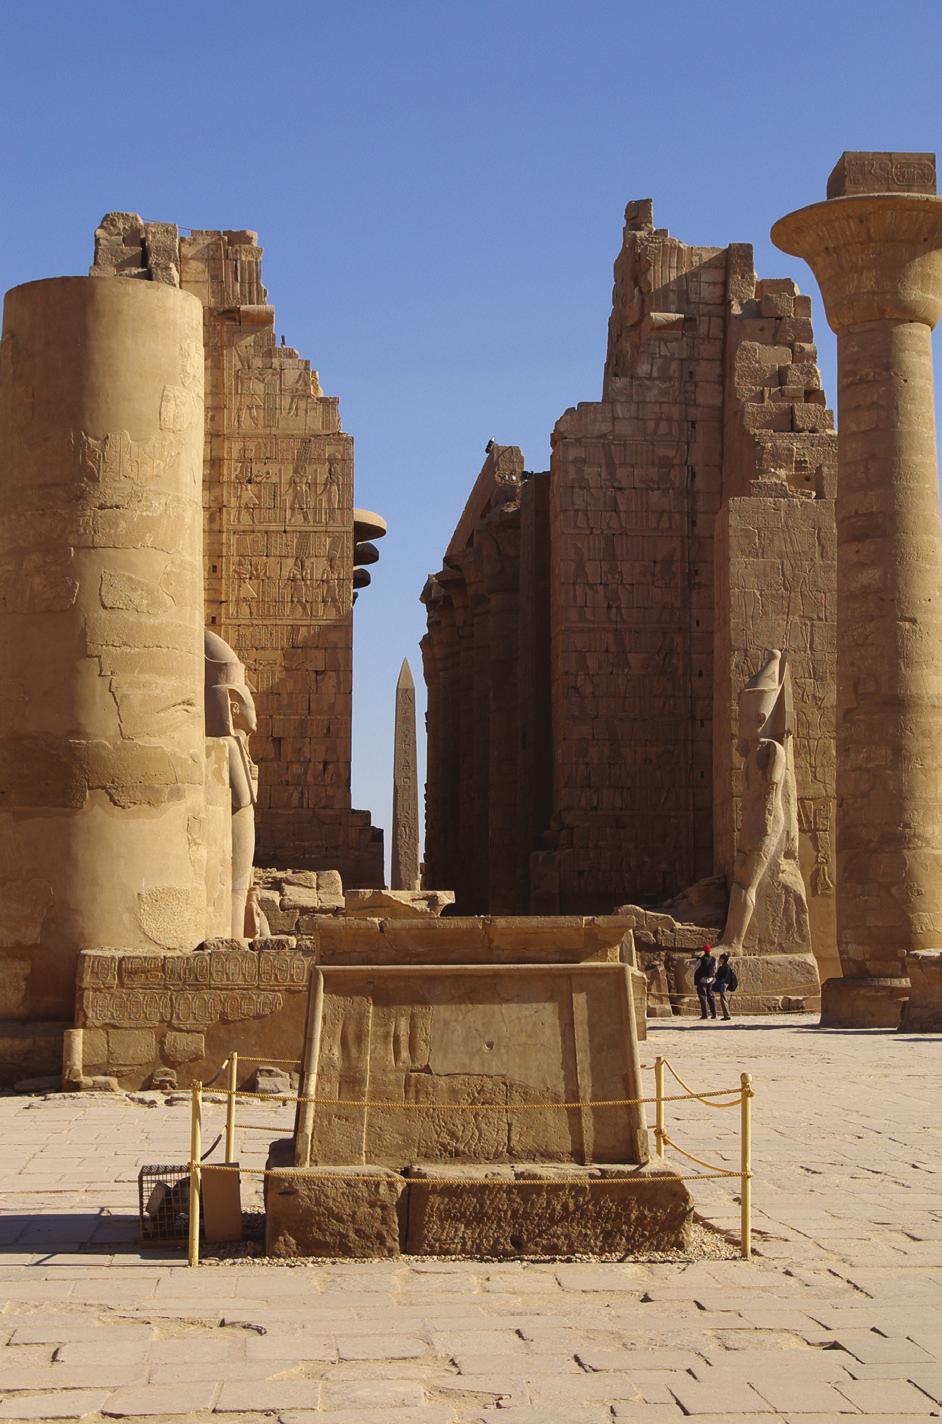 temple complex (built over the course of a thousand years), where a generous amount of time is scheduled for exploring. Then visit the small but beautiful Luxor Museum.